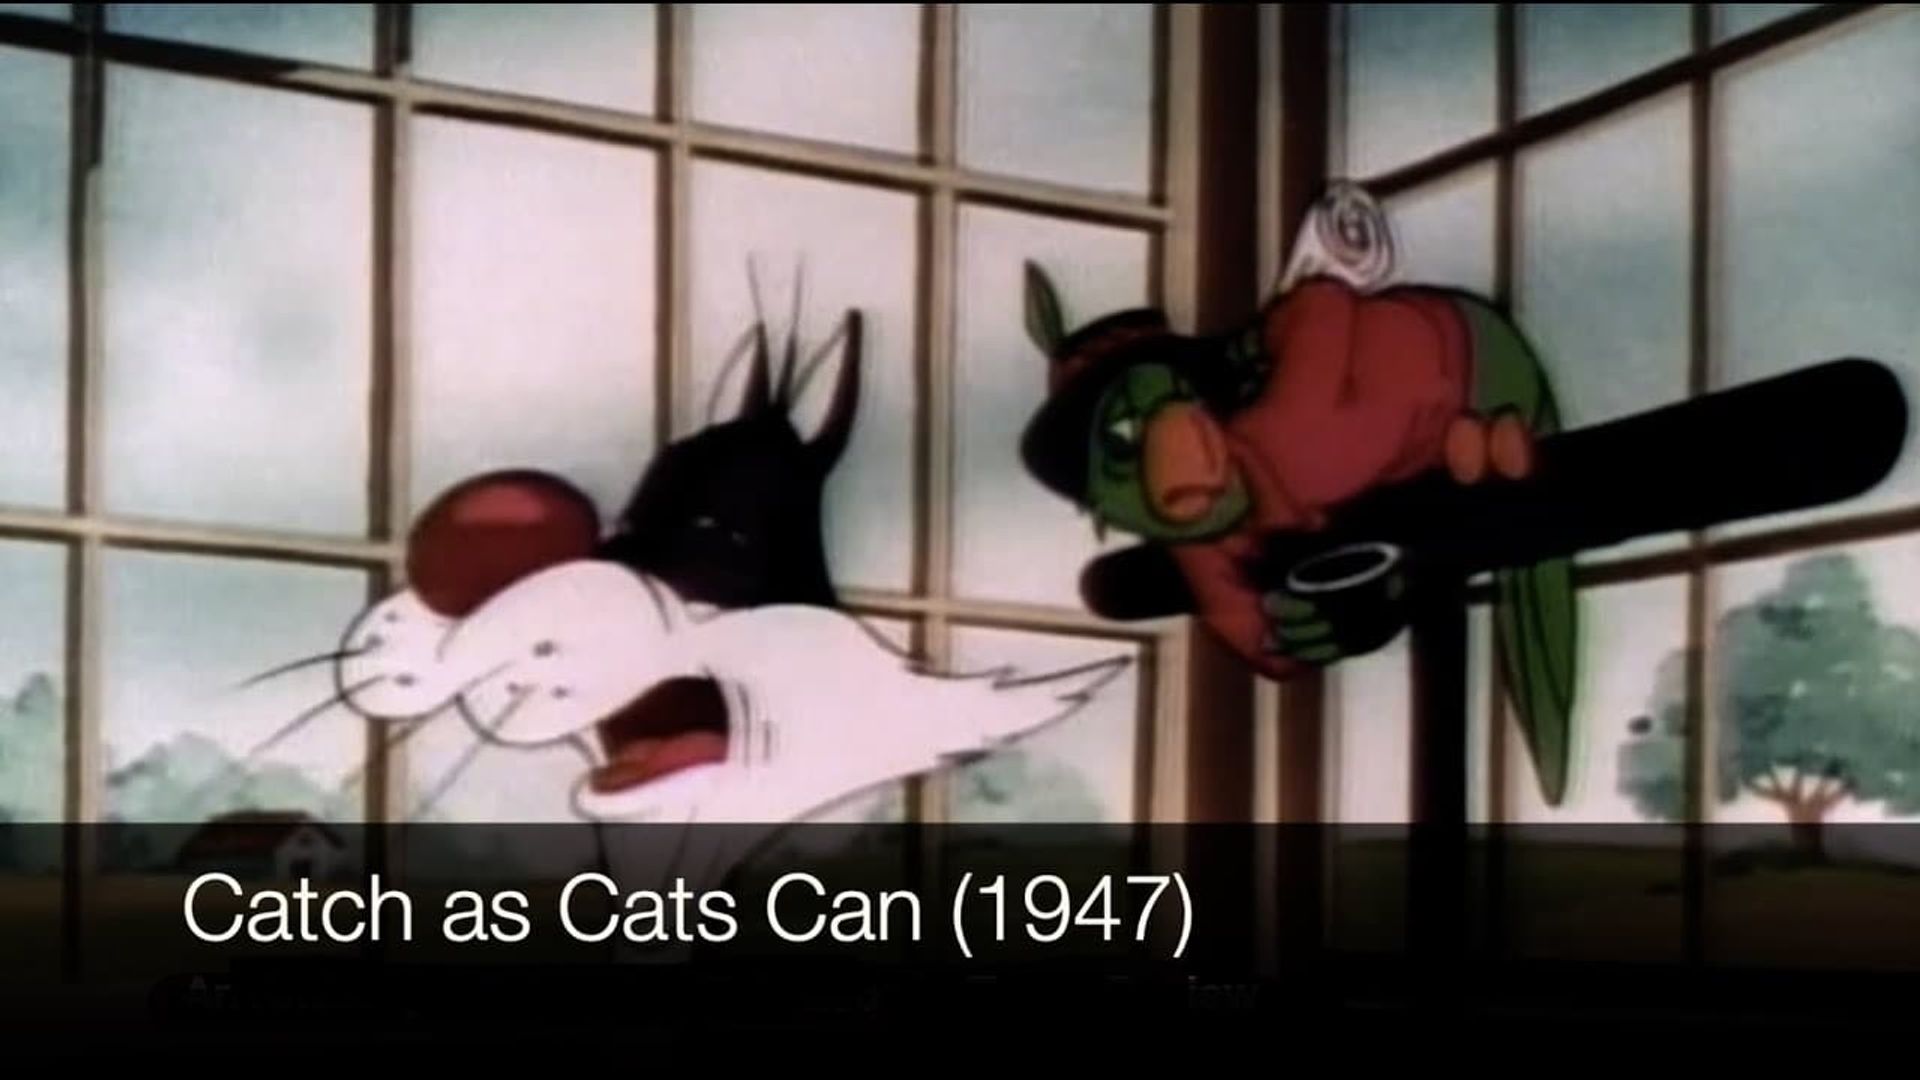 Catch as Cats Can background